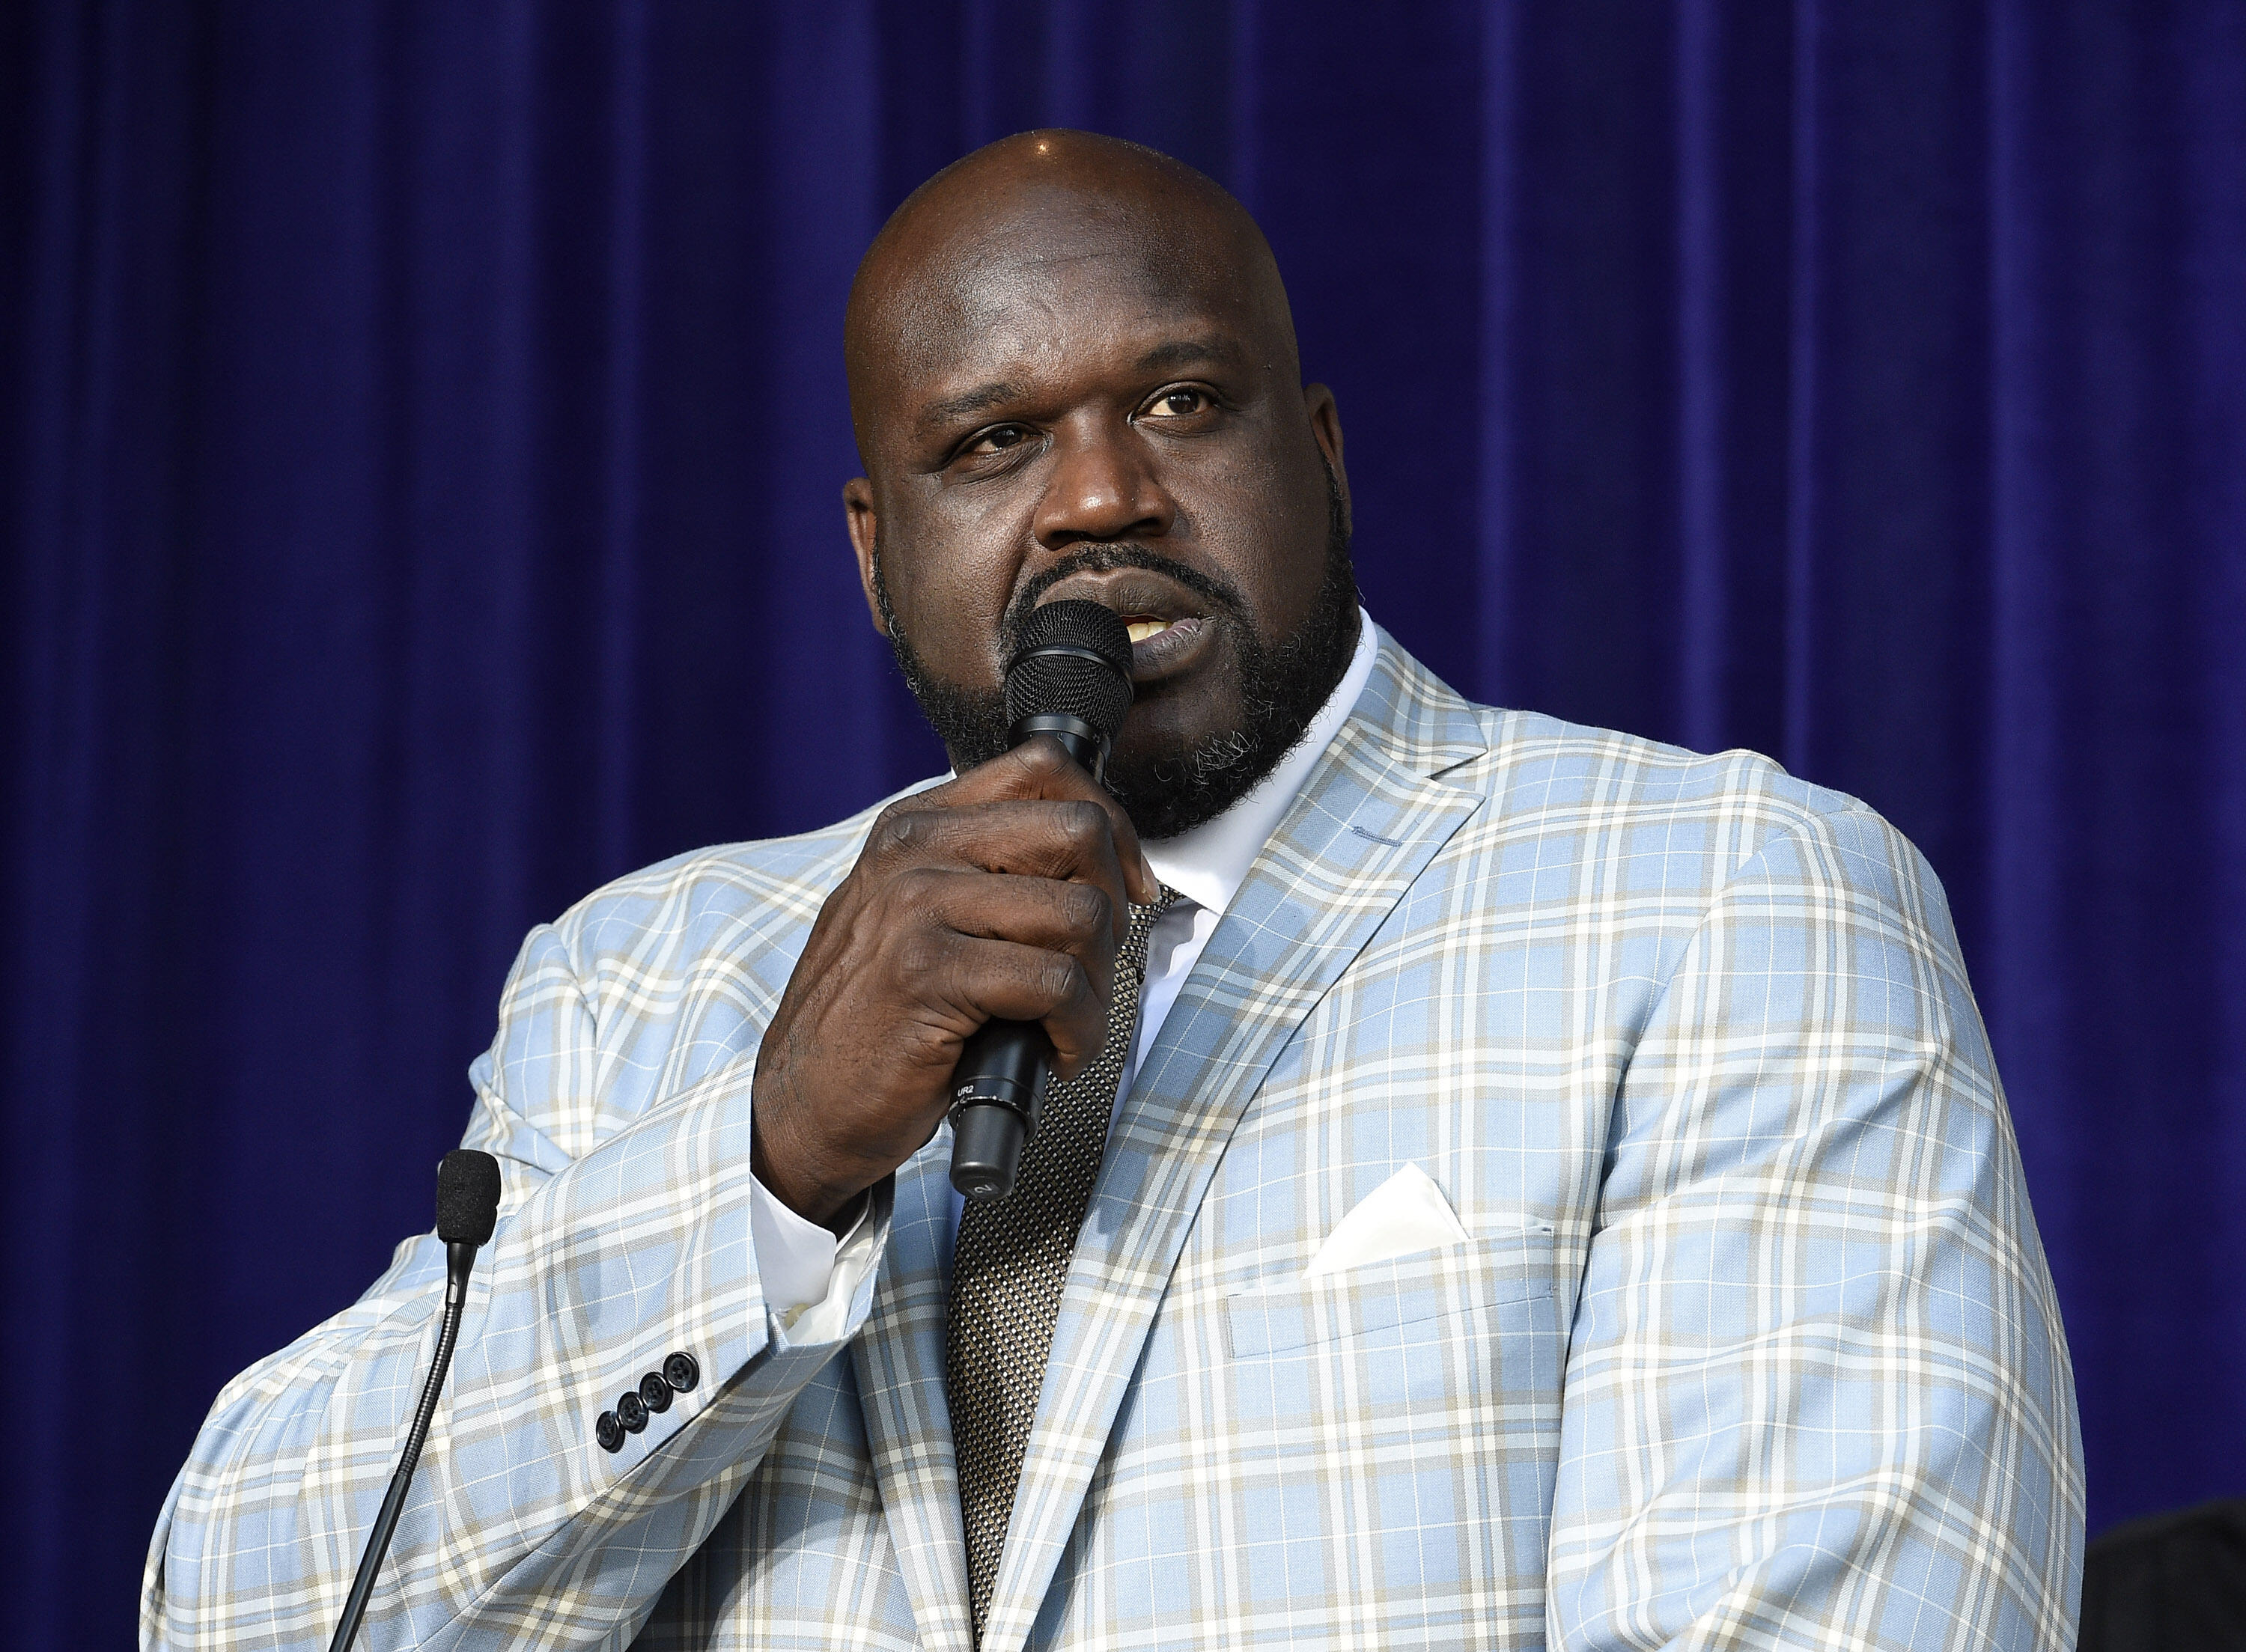 LOS ANGELES, CA - MARCH 24: Former Los Angeles Lakers player Shaquille O'Neal speaks after unveiling of his statue at Staples Center March 24, 2017, in Los Angeles, California. NOTE TO USER: User expressly acknowledges and agrees that, by downloading and 